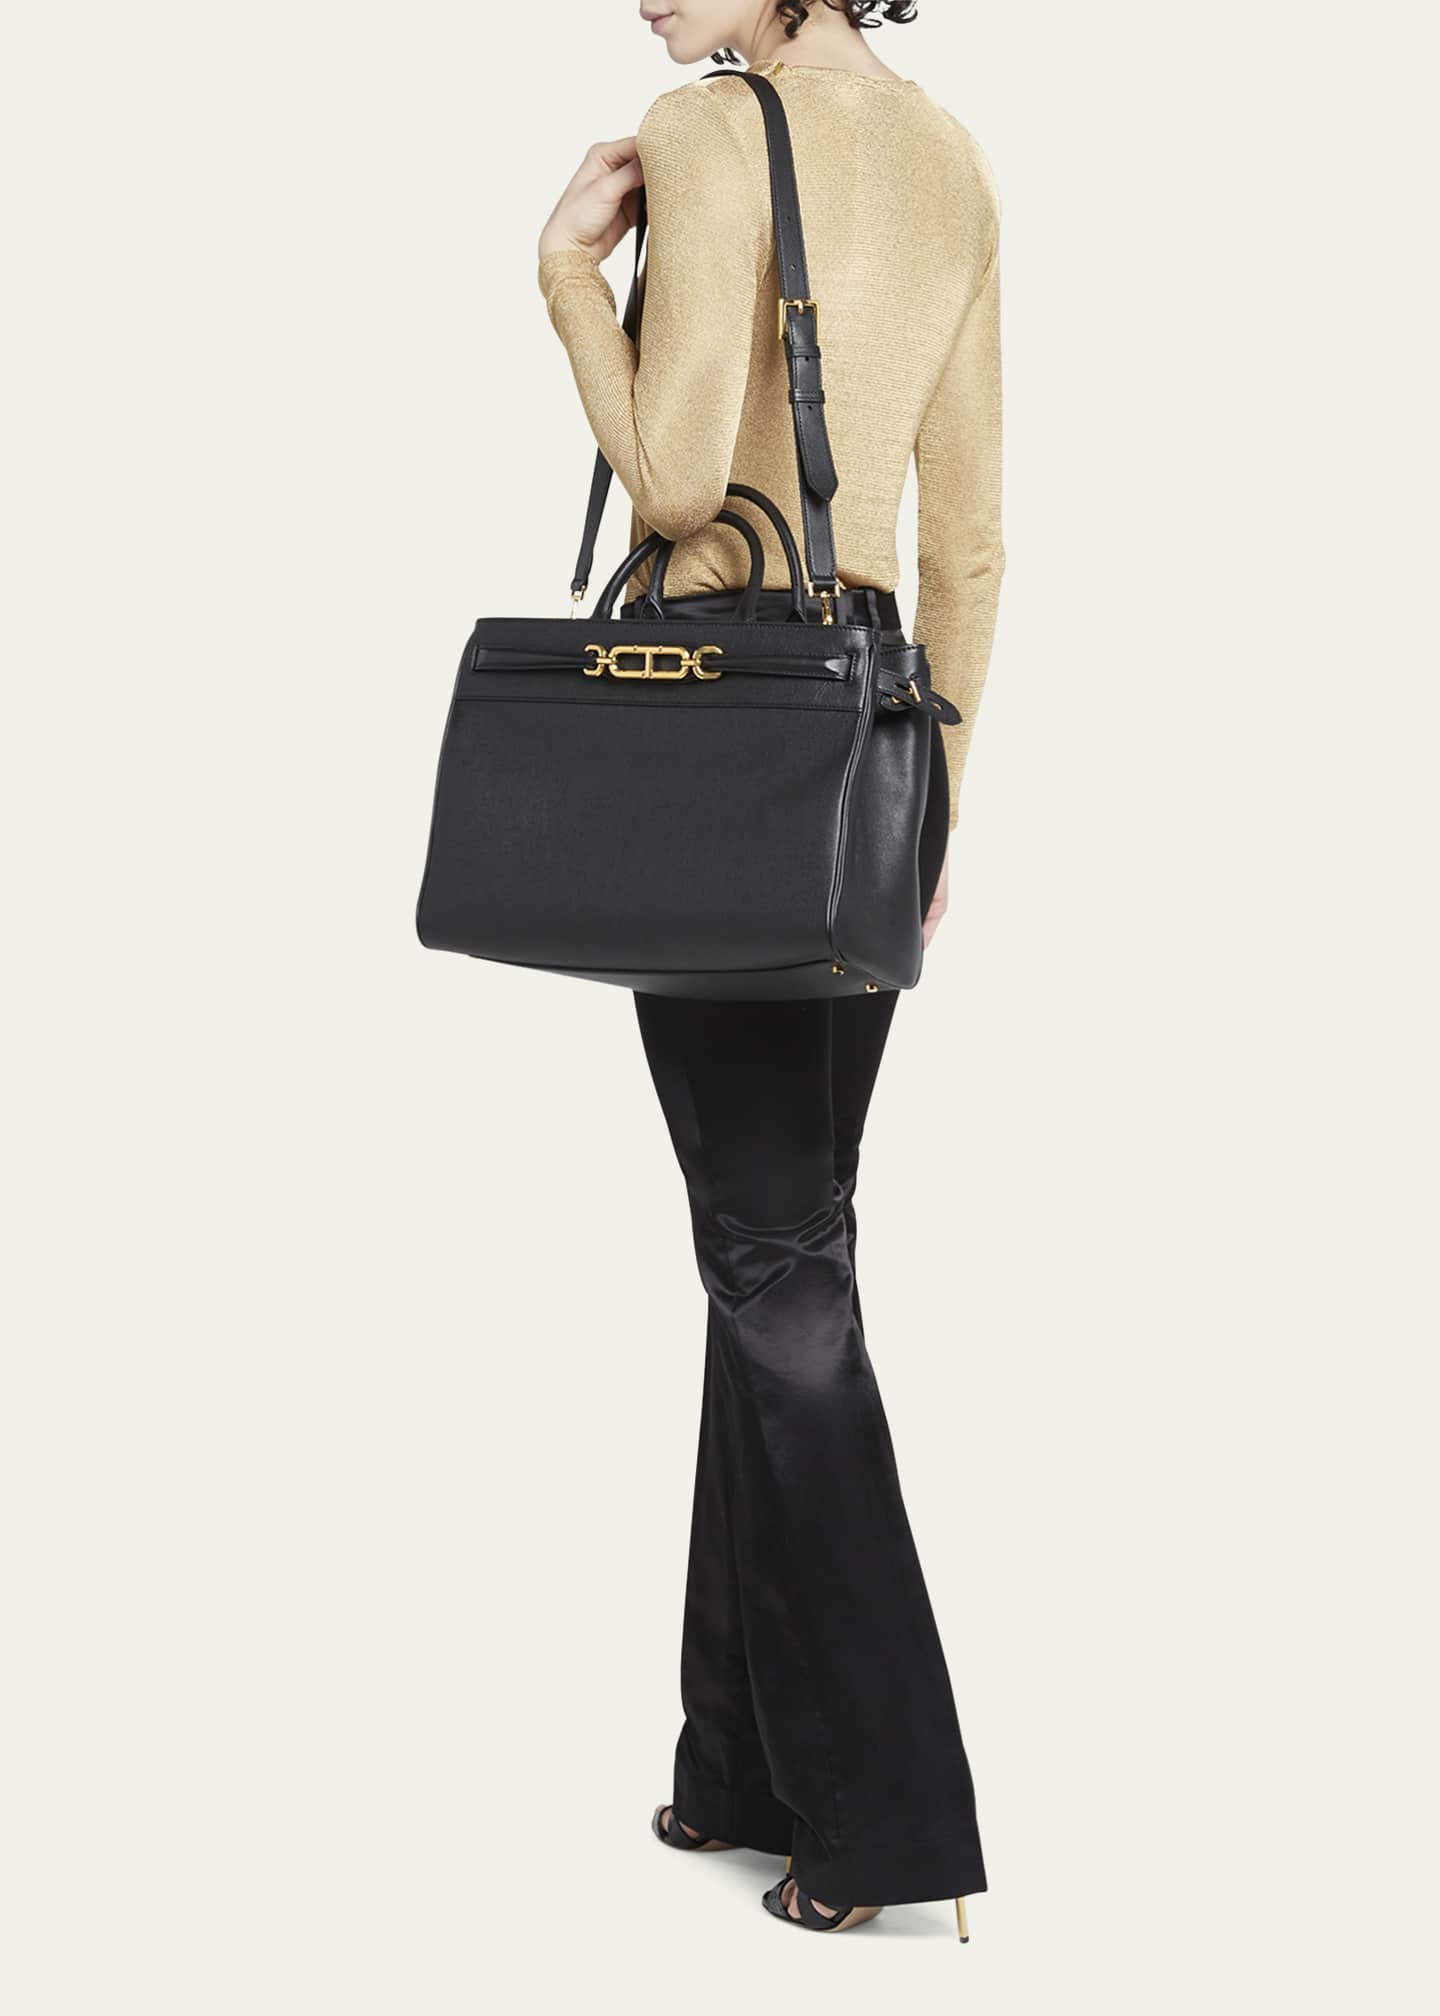 TOM FORD Whitney Large Top-Handle Bag in Leather - Bergdorf Goodman